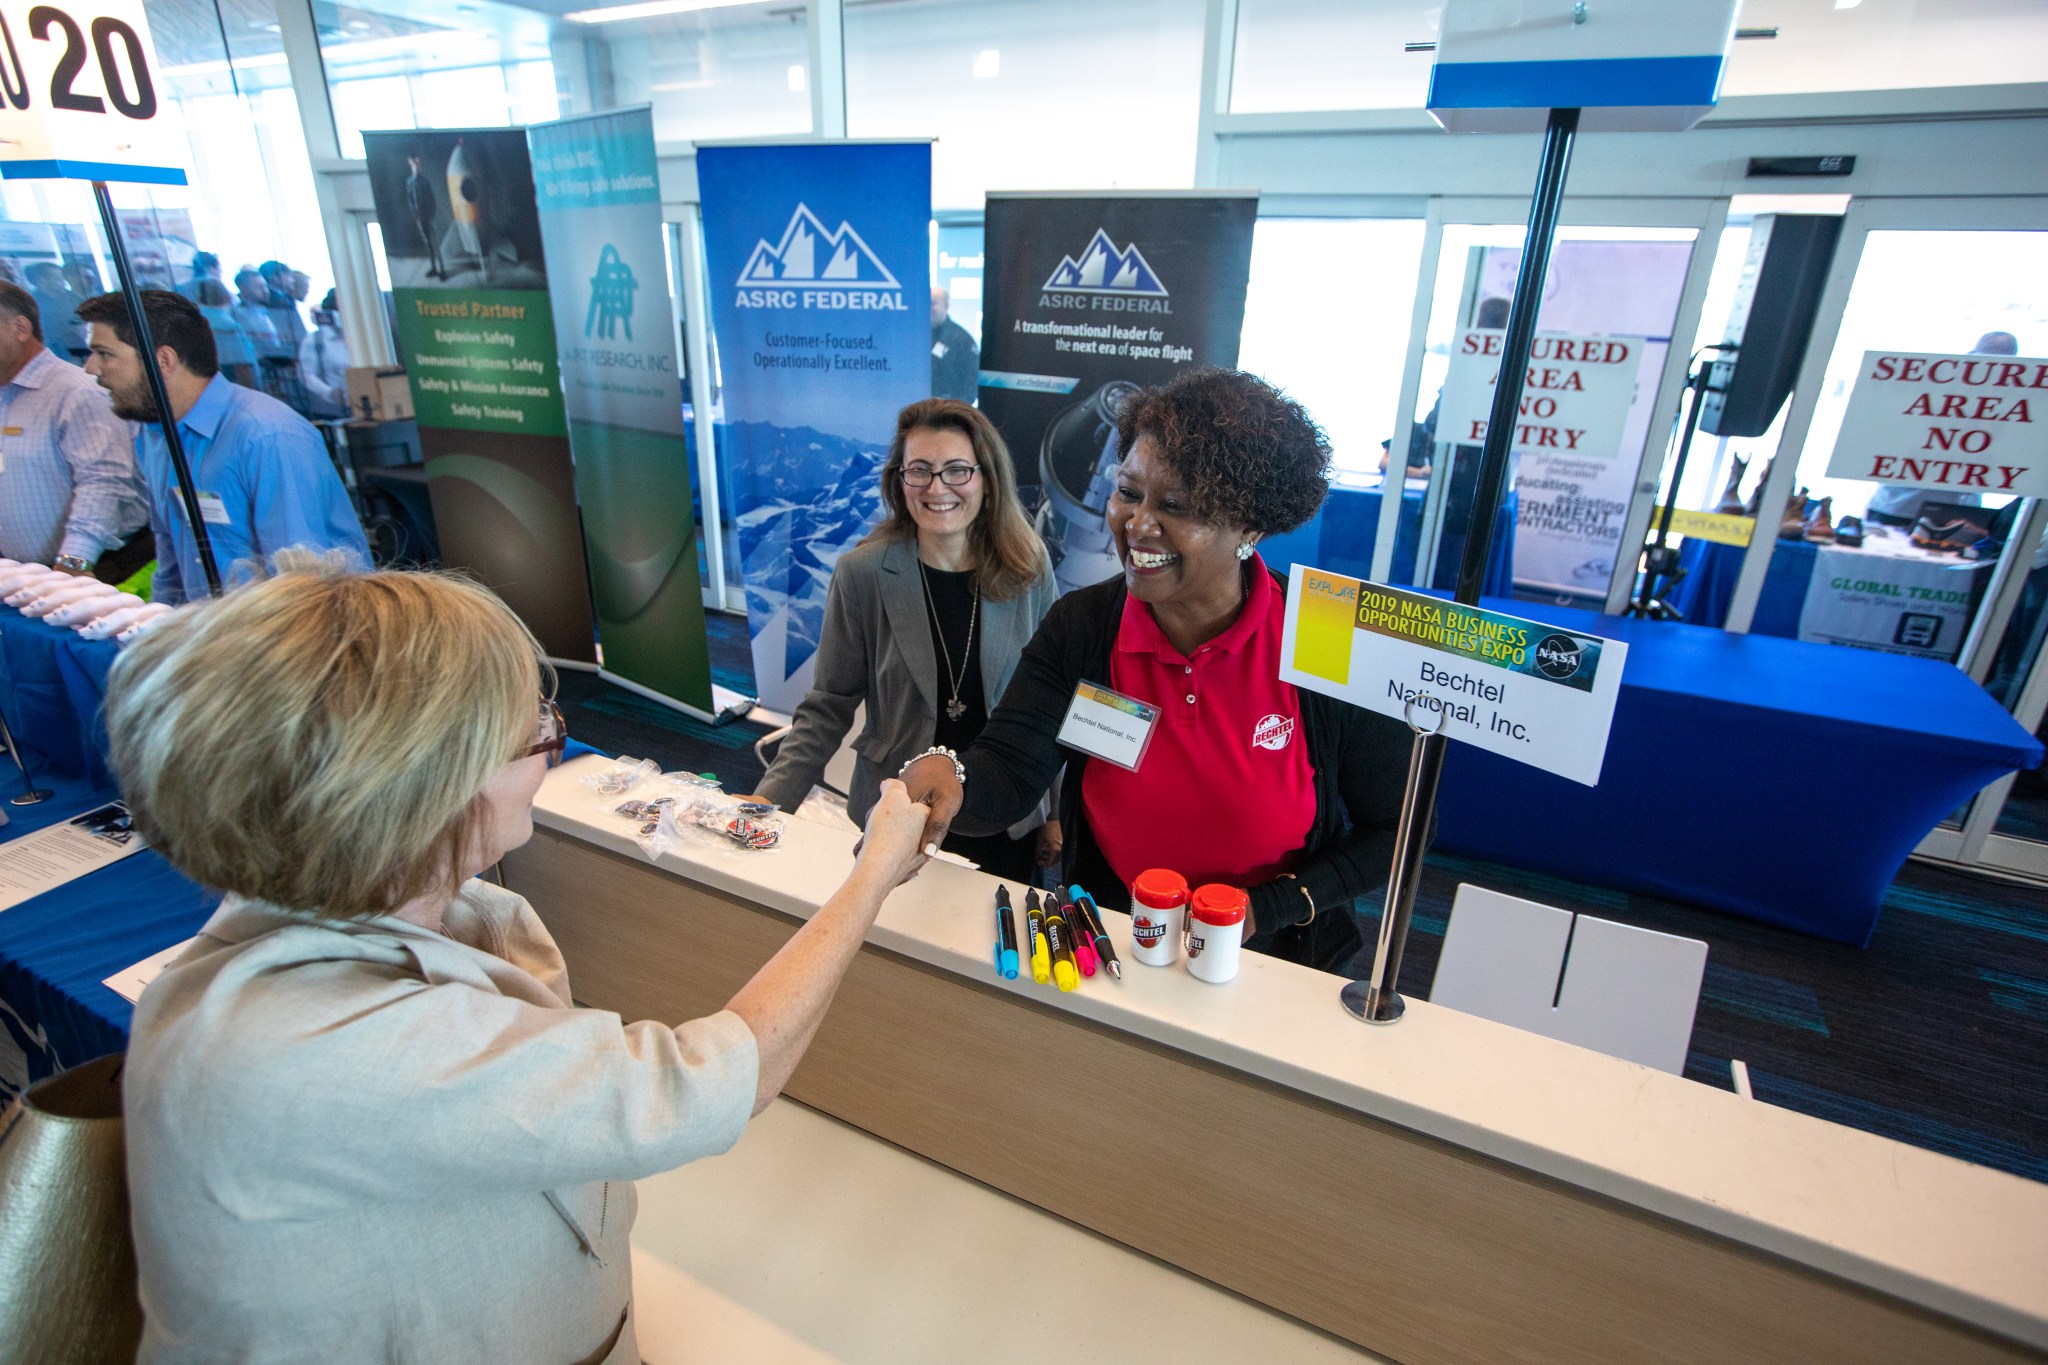 NASA Business Opportunities Expo 2019 exhibitors on Oct. 23, at Port Canaveral in Florida.